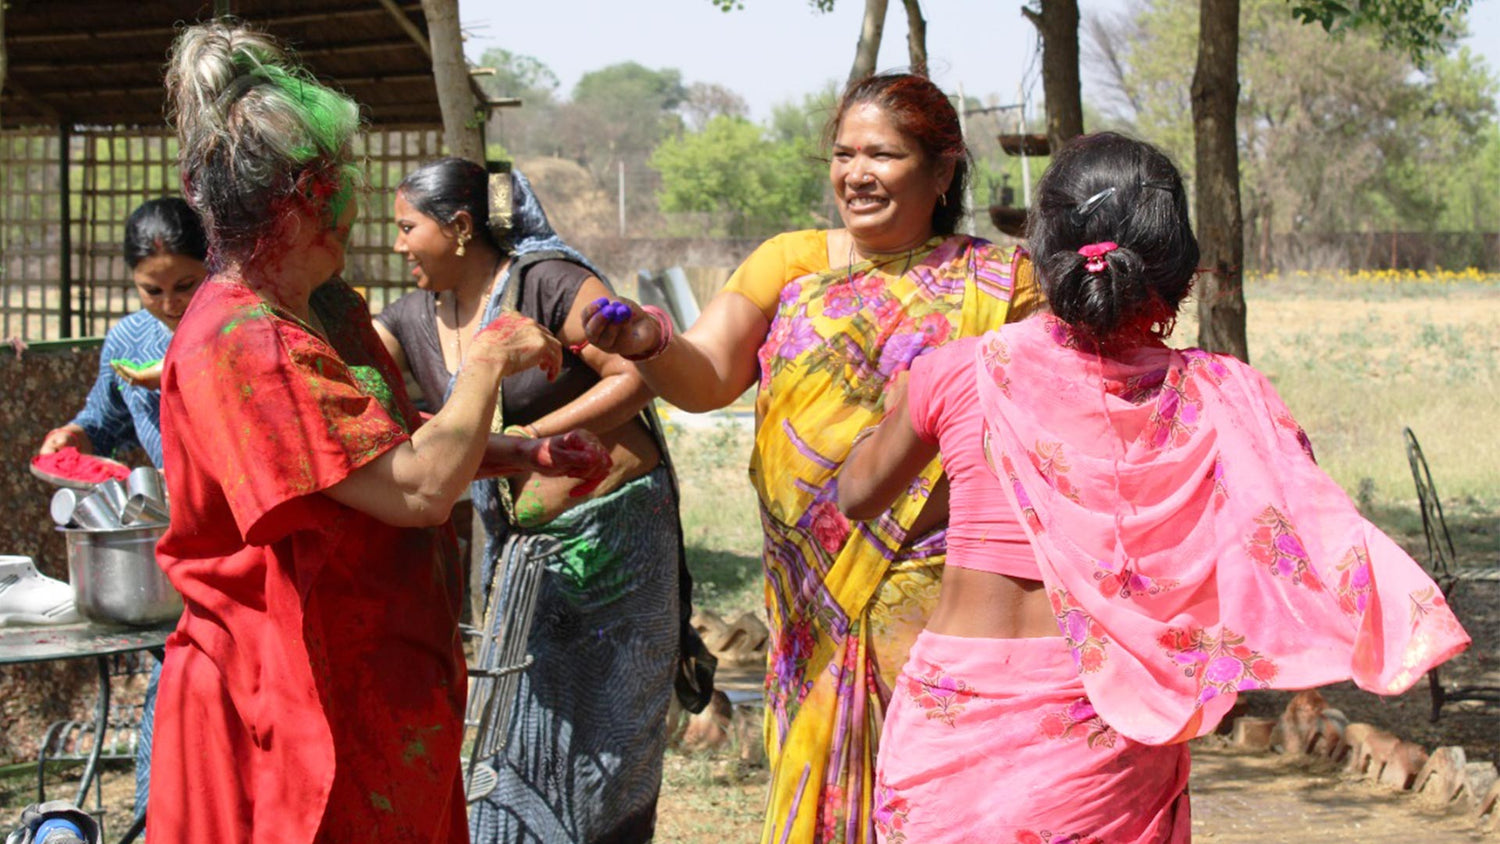 Group of women wearing saris and covering each other in colourful dyes to celebrate Holi.